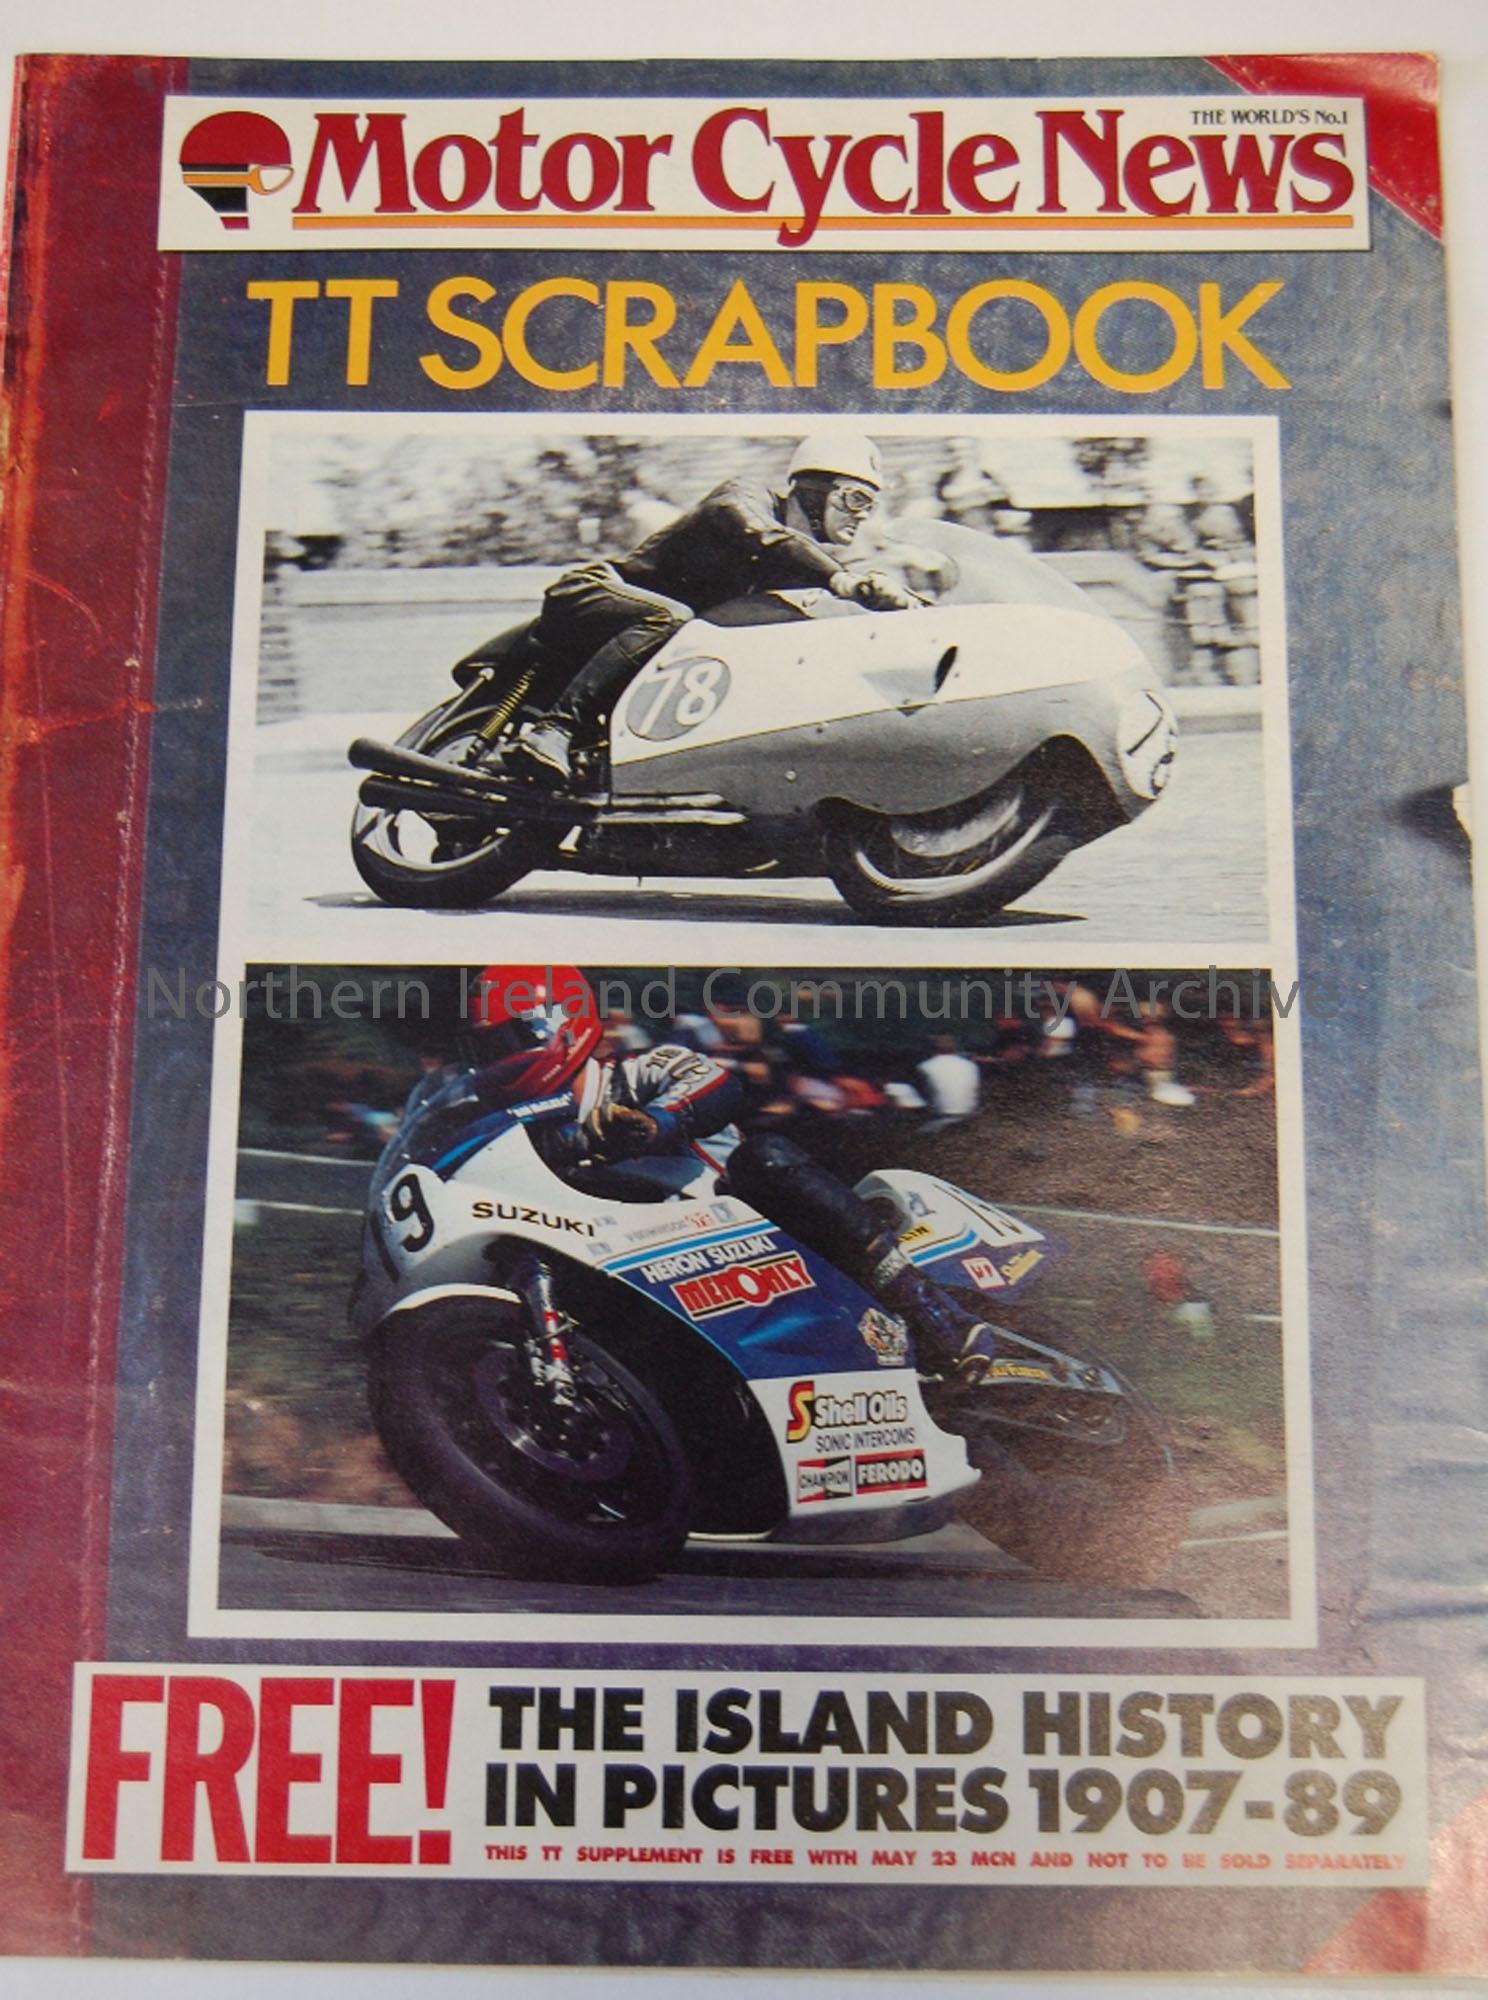 Motor Cycle News TT Scrapbook – The Island History in pictures 1907-1989